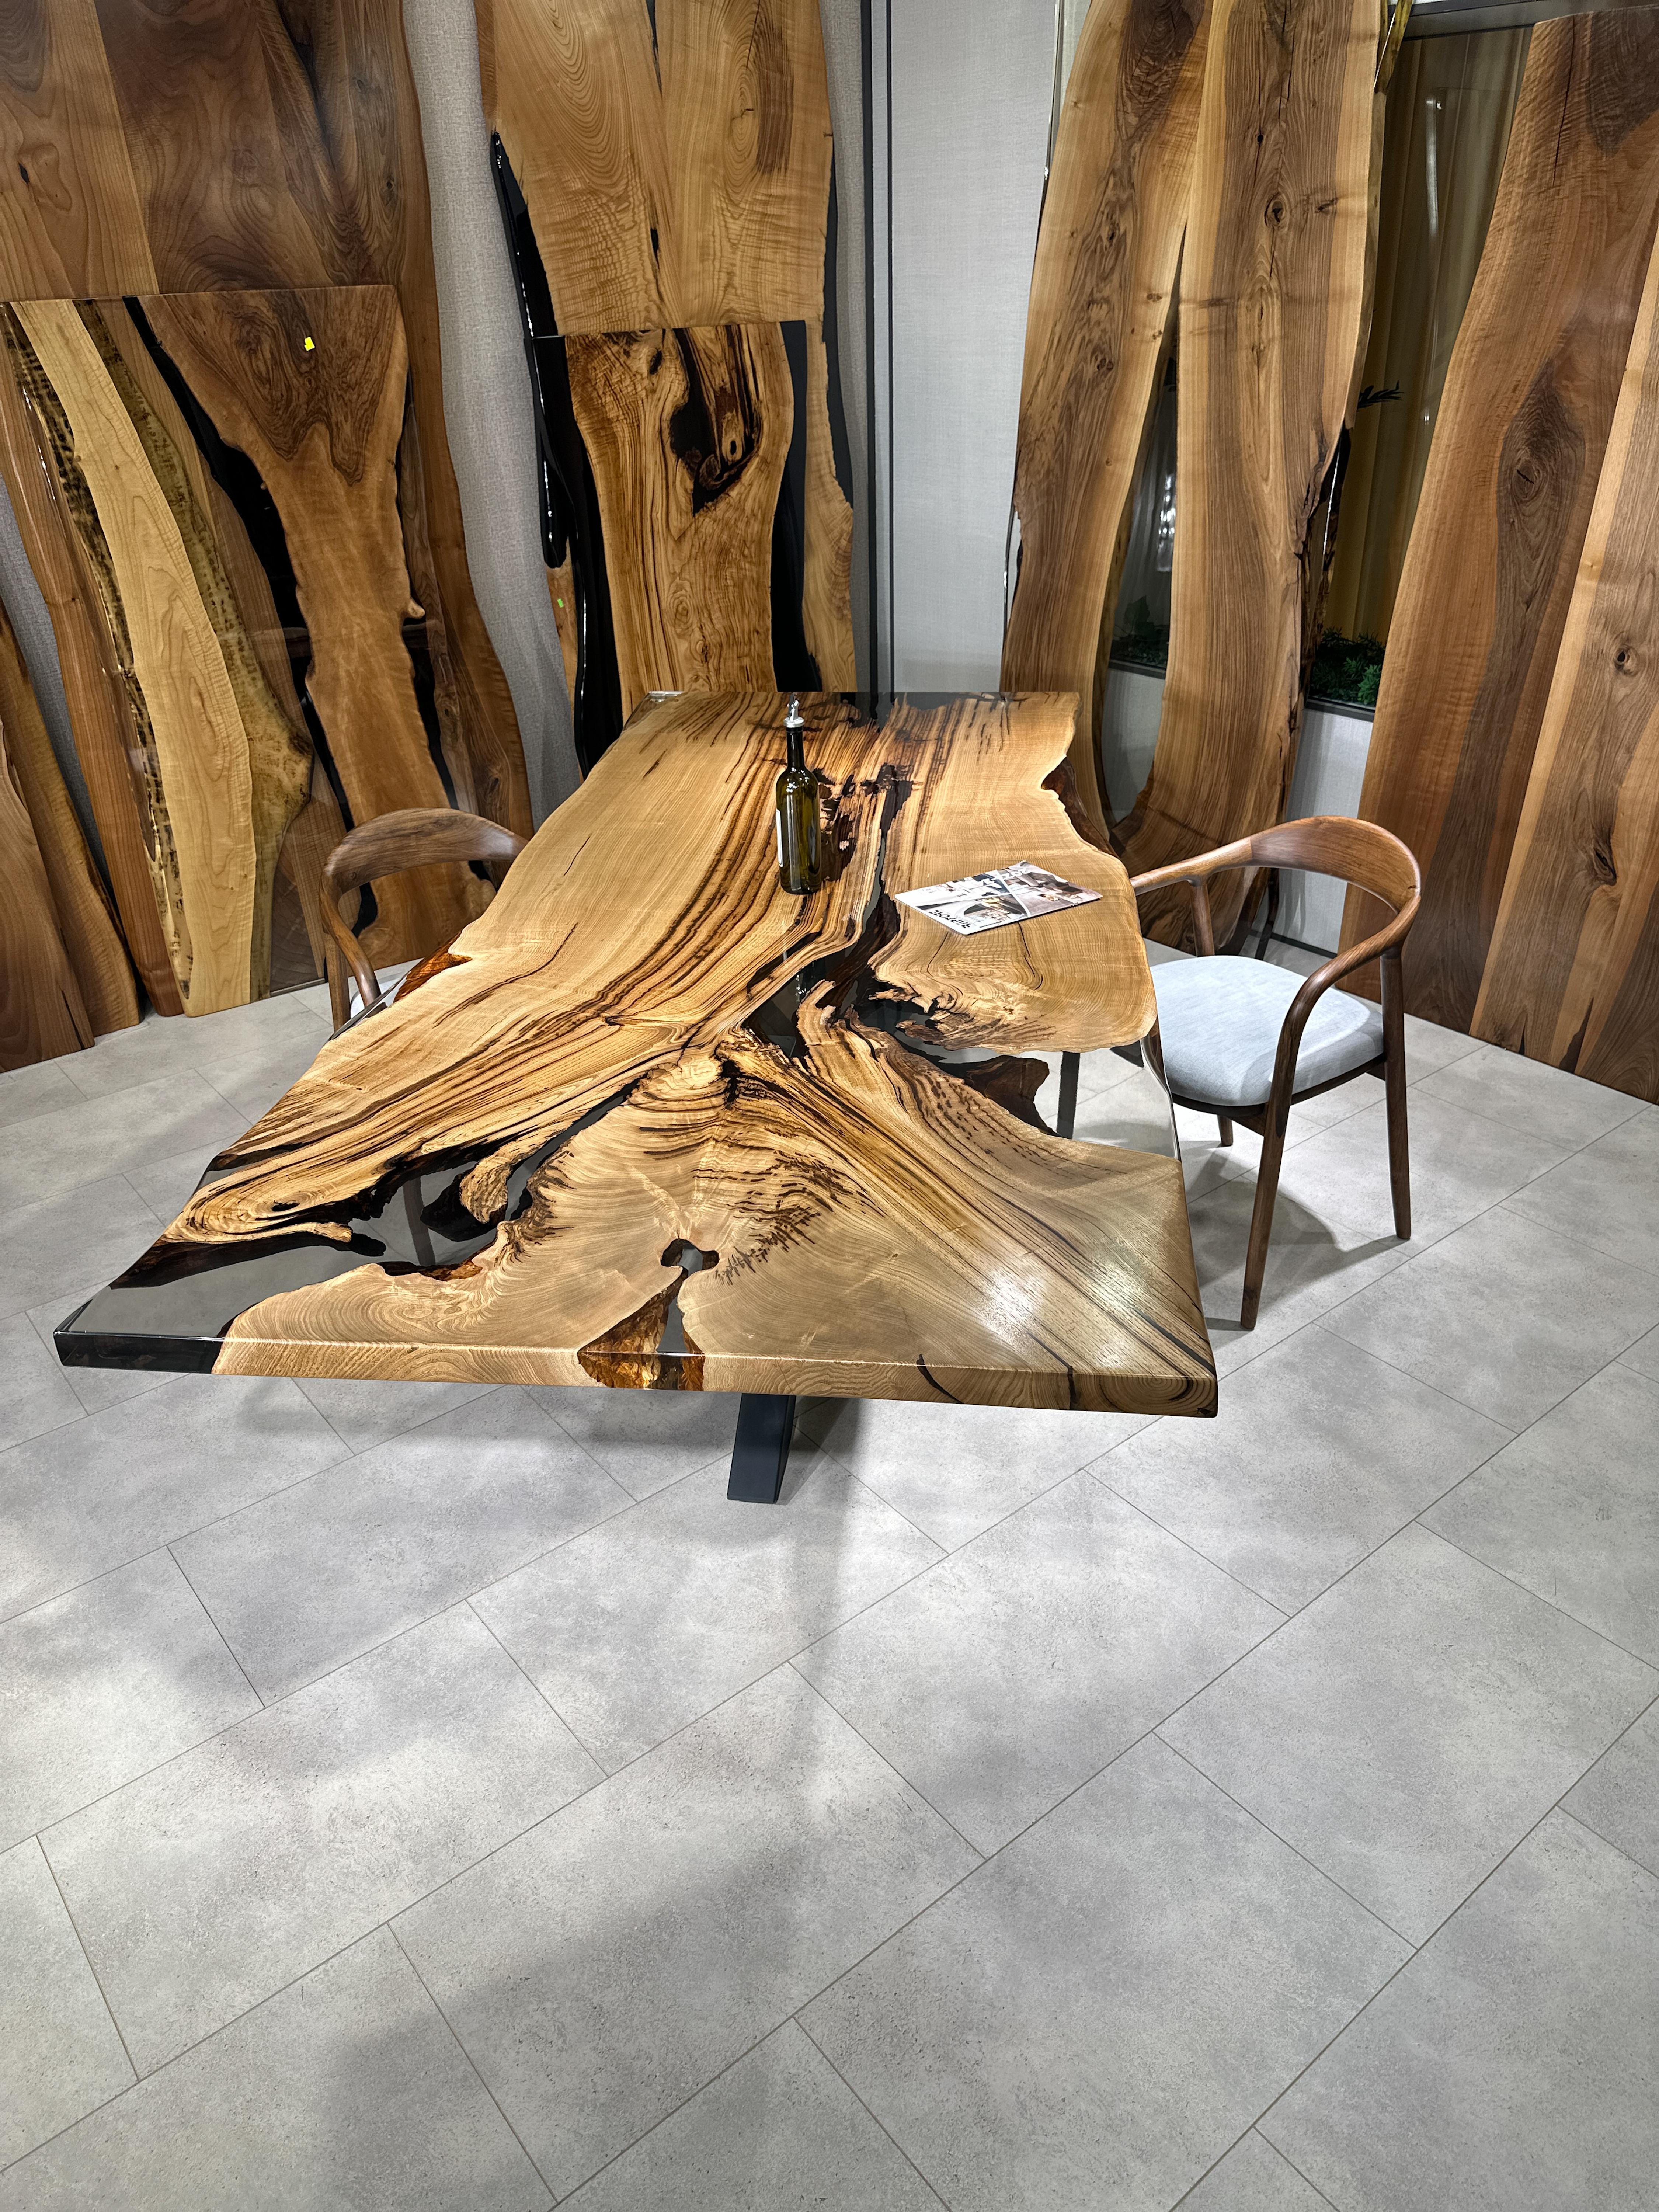 Chestnut Custom Clear Epoxy Resin Dining Table 

This table is made of 500 years old Chestnut Wood. The grains and texture of the wood describe what a natural walnut woods looks like.
It can be used as a dining table or as a conference table.